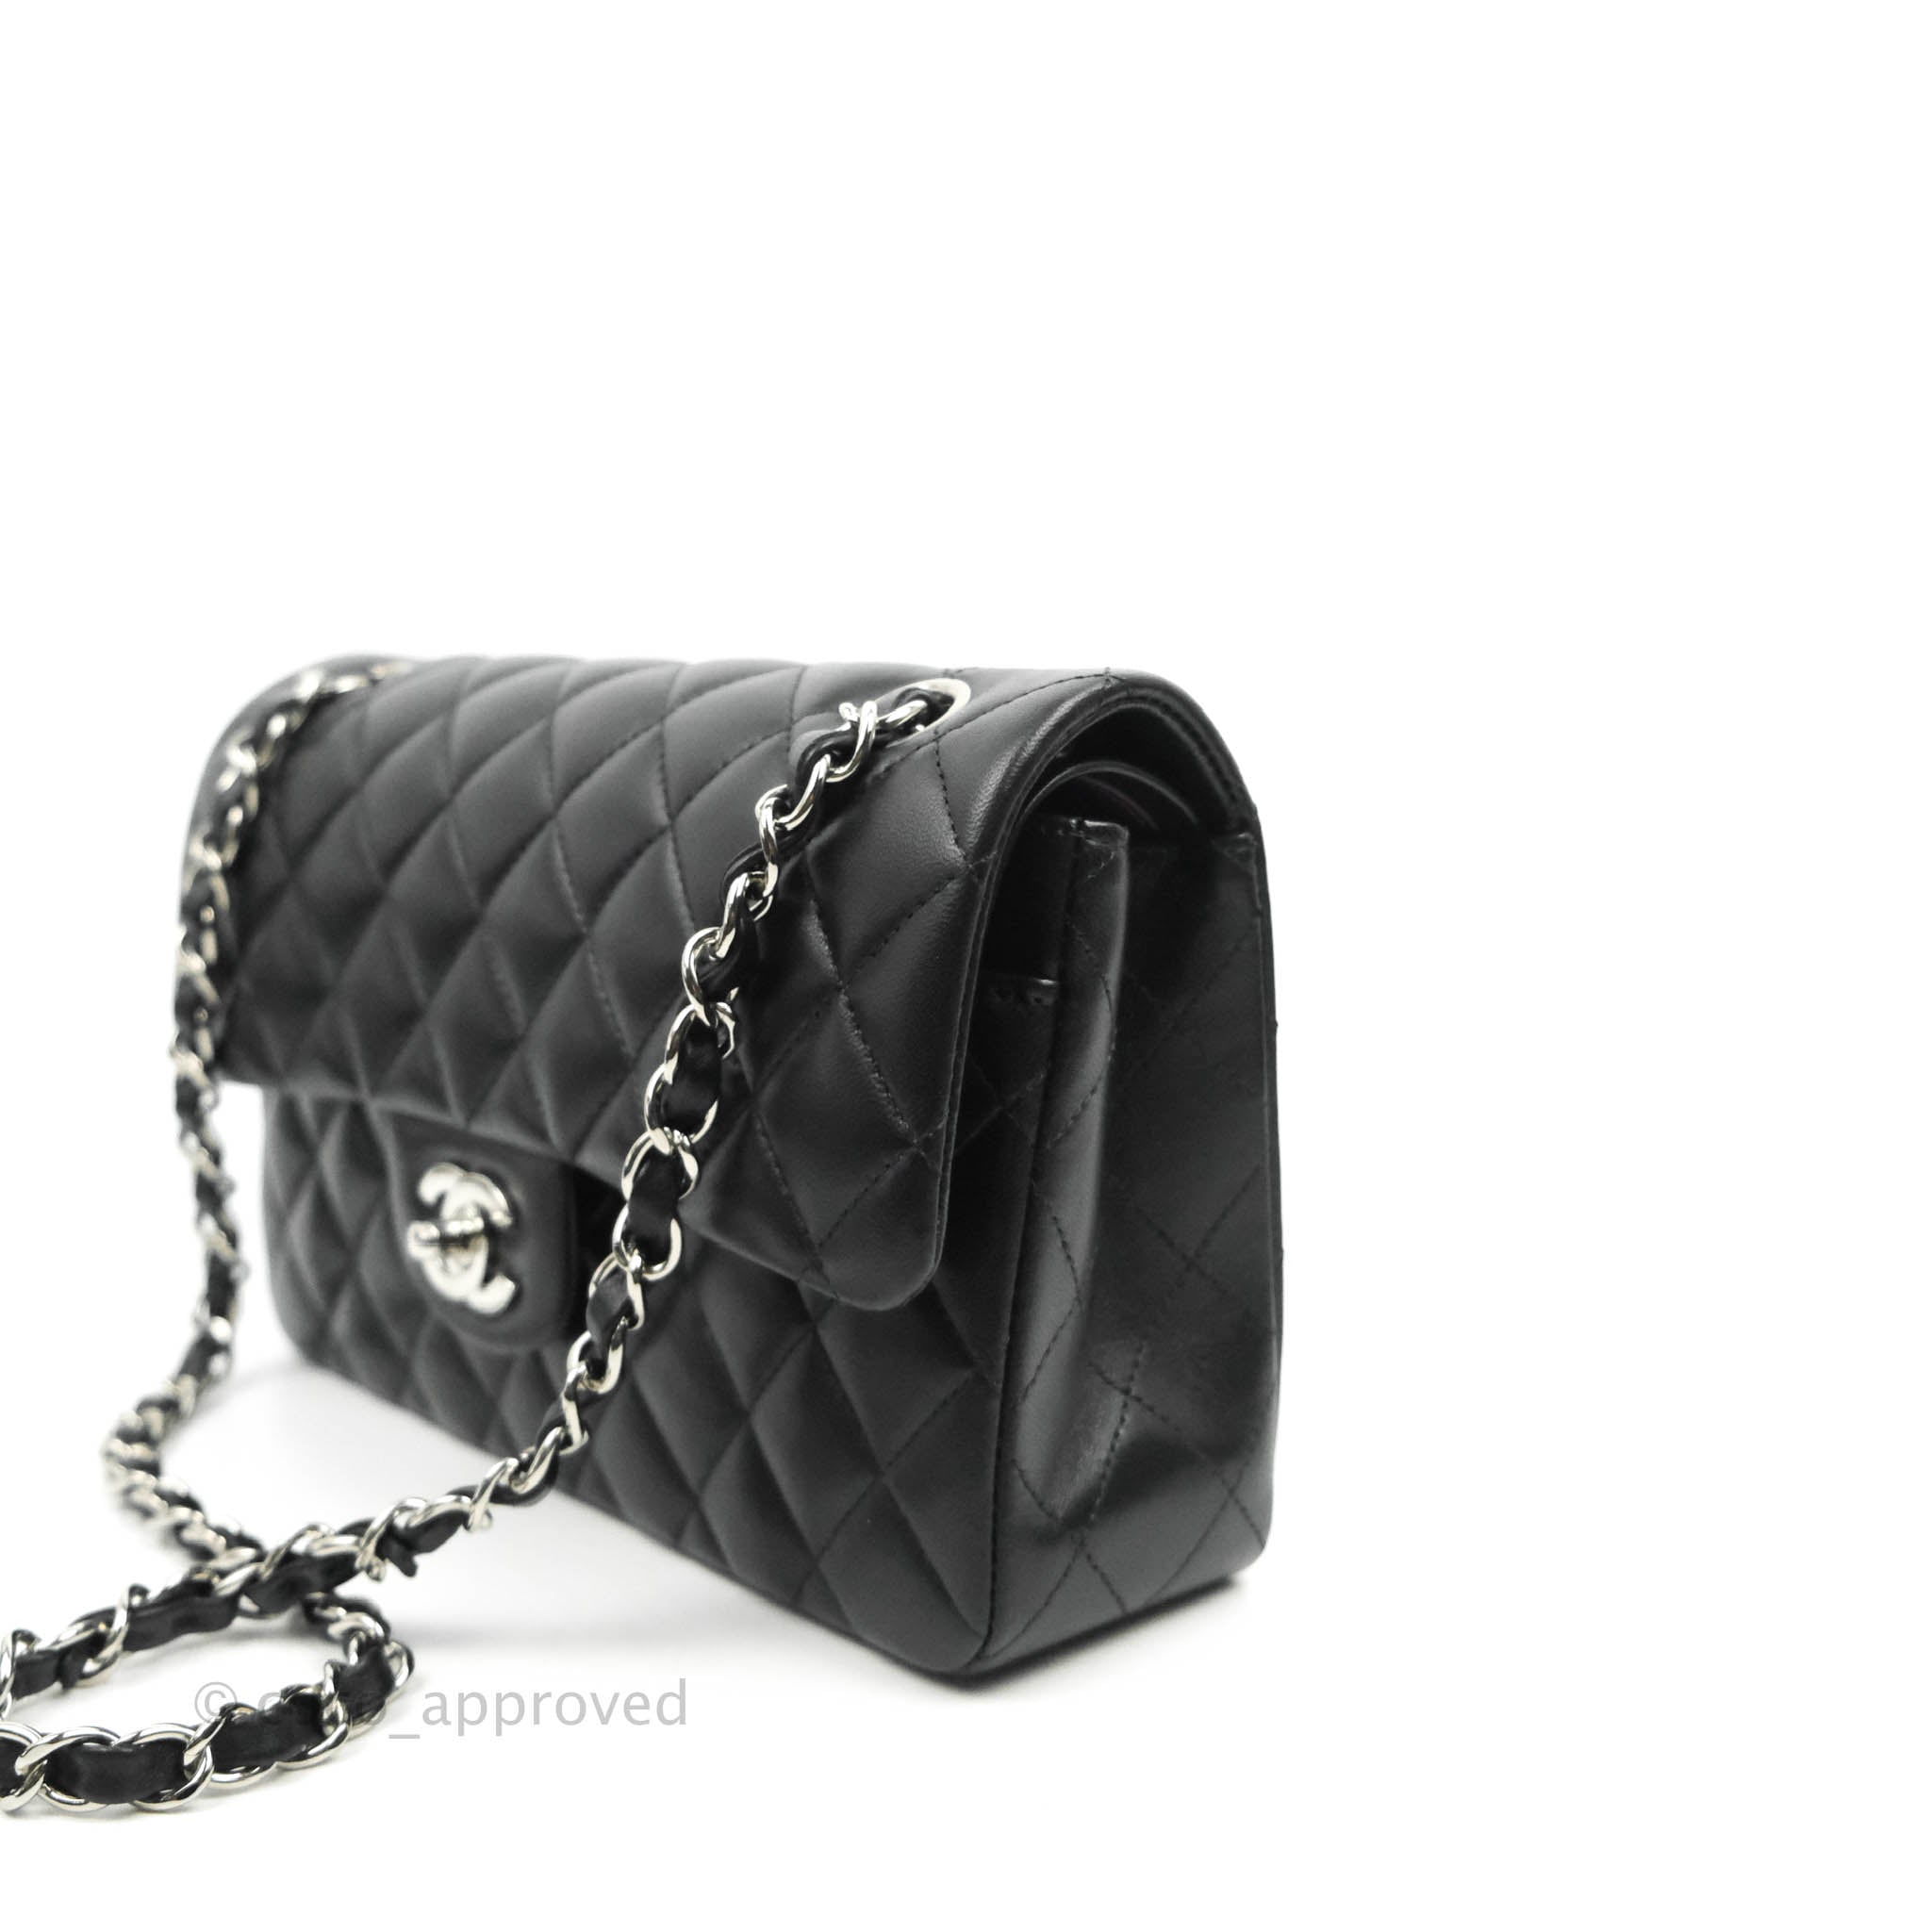 Buy Vintage CHANEL Diana Flap GHW Bag | Exclusive SALE at REDELUXE